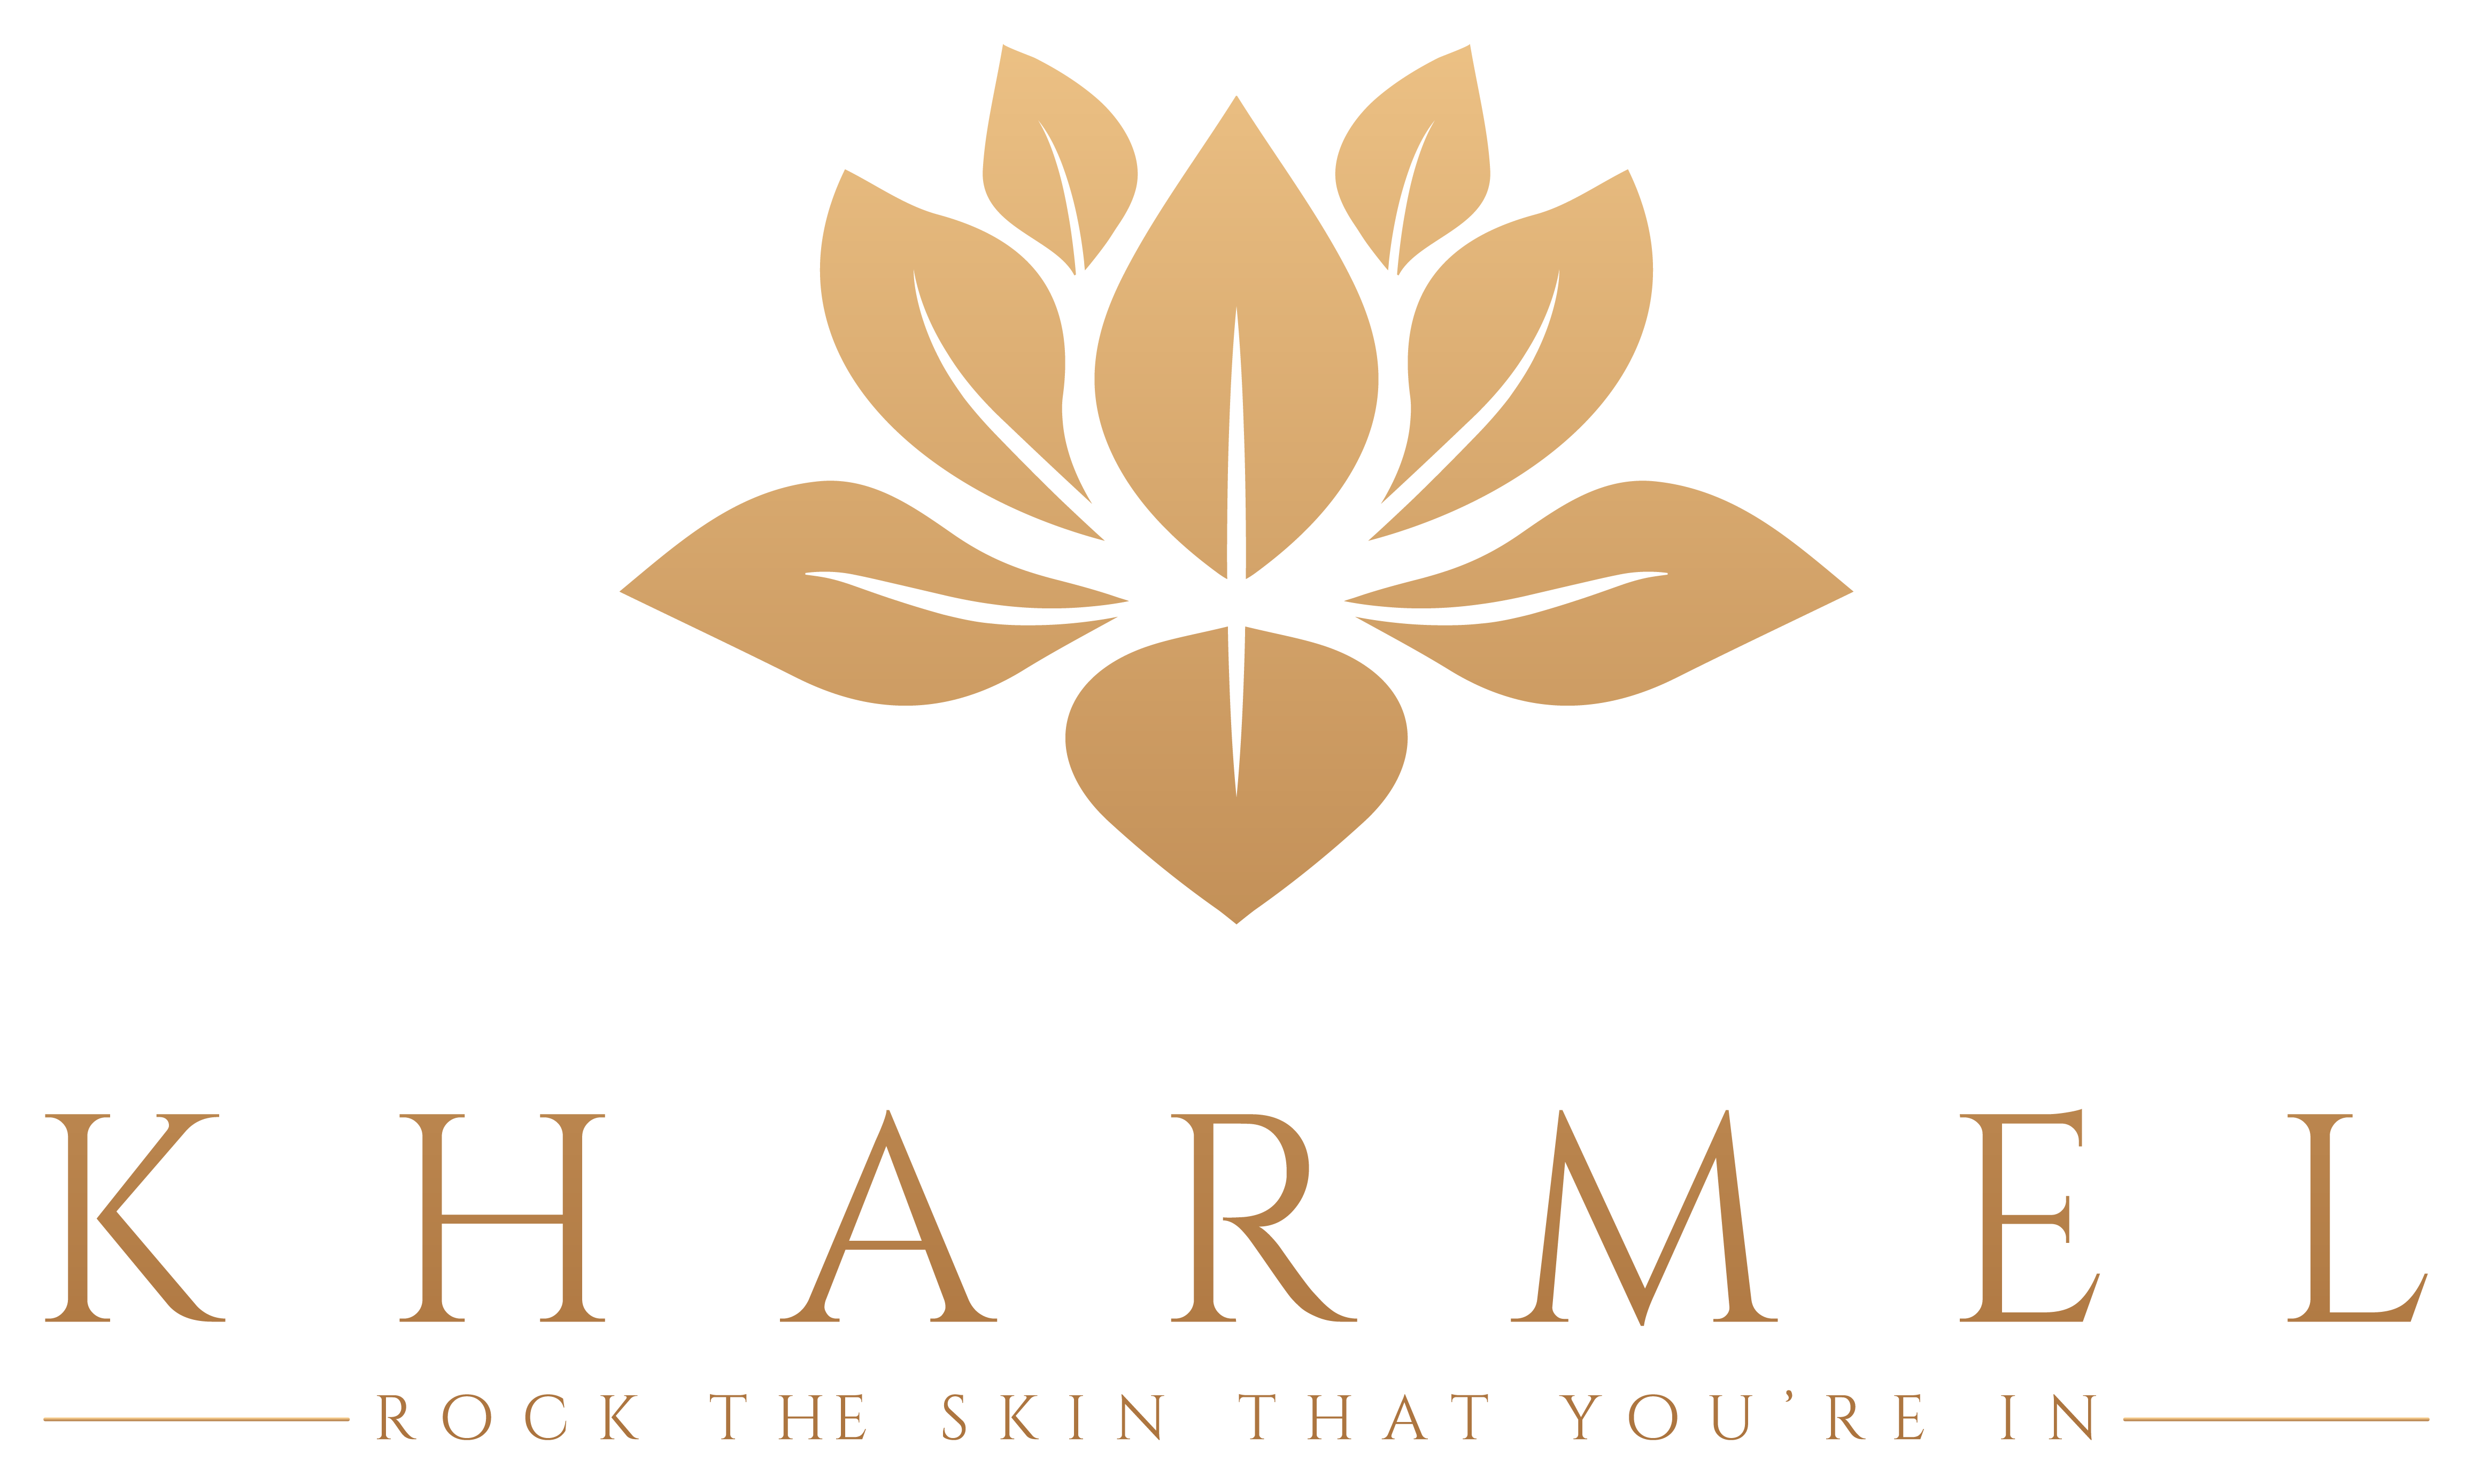 A gold colored logo of the company dharma.